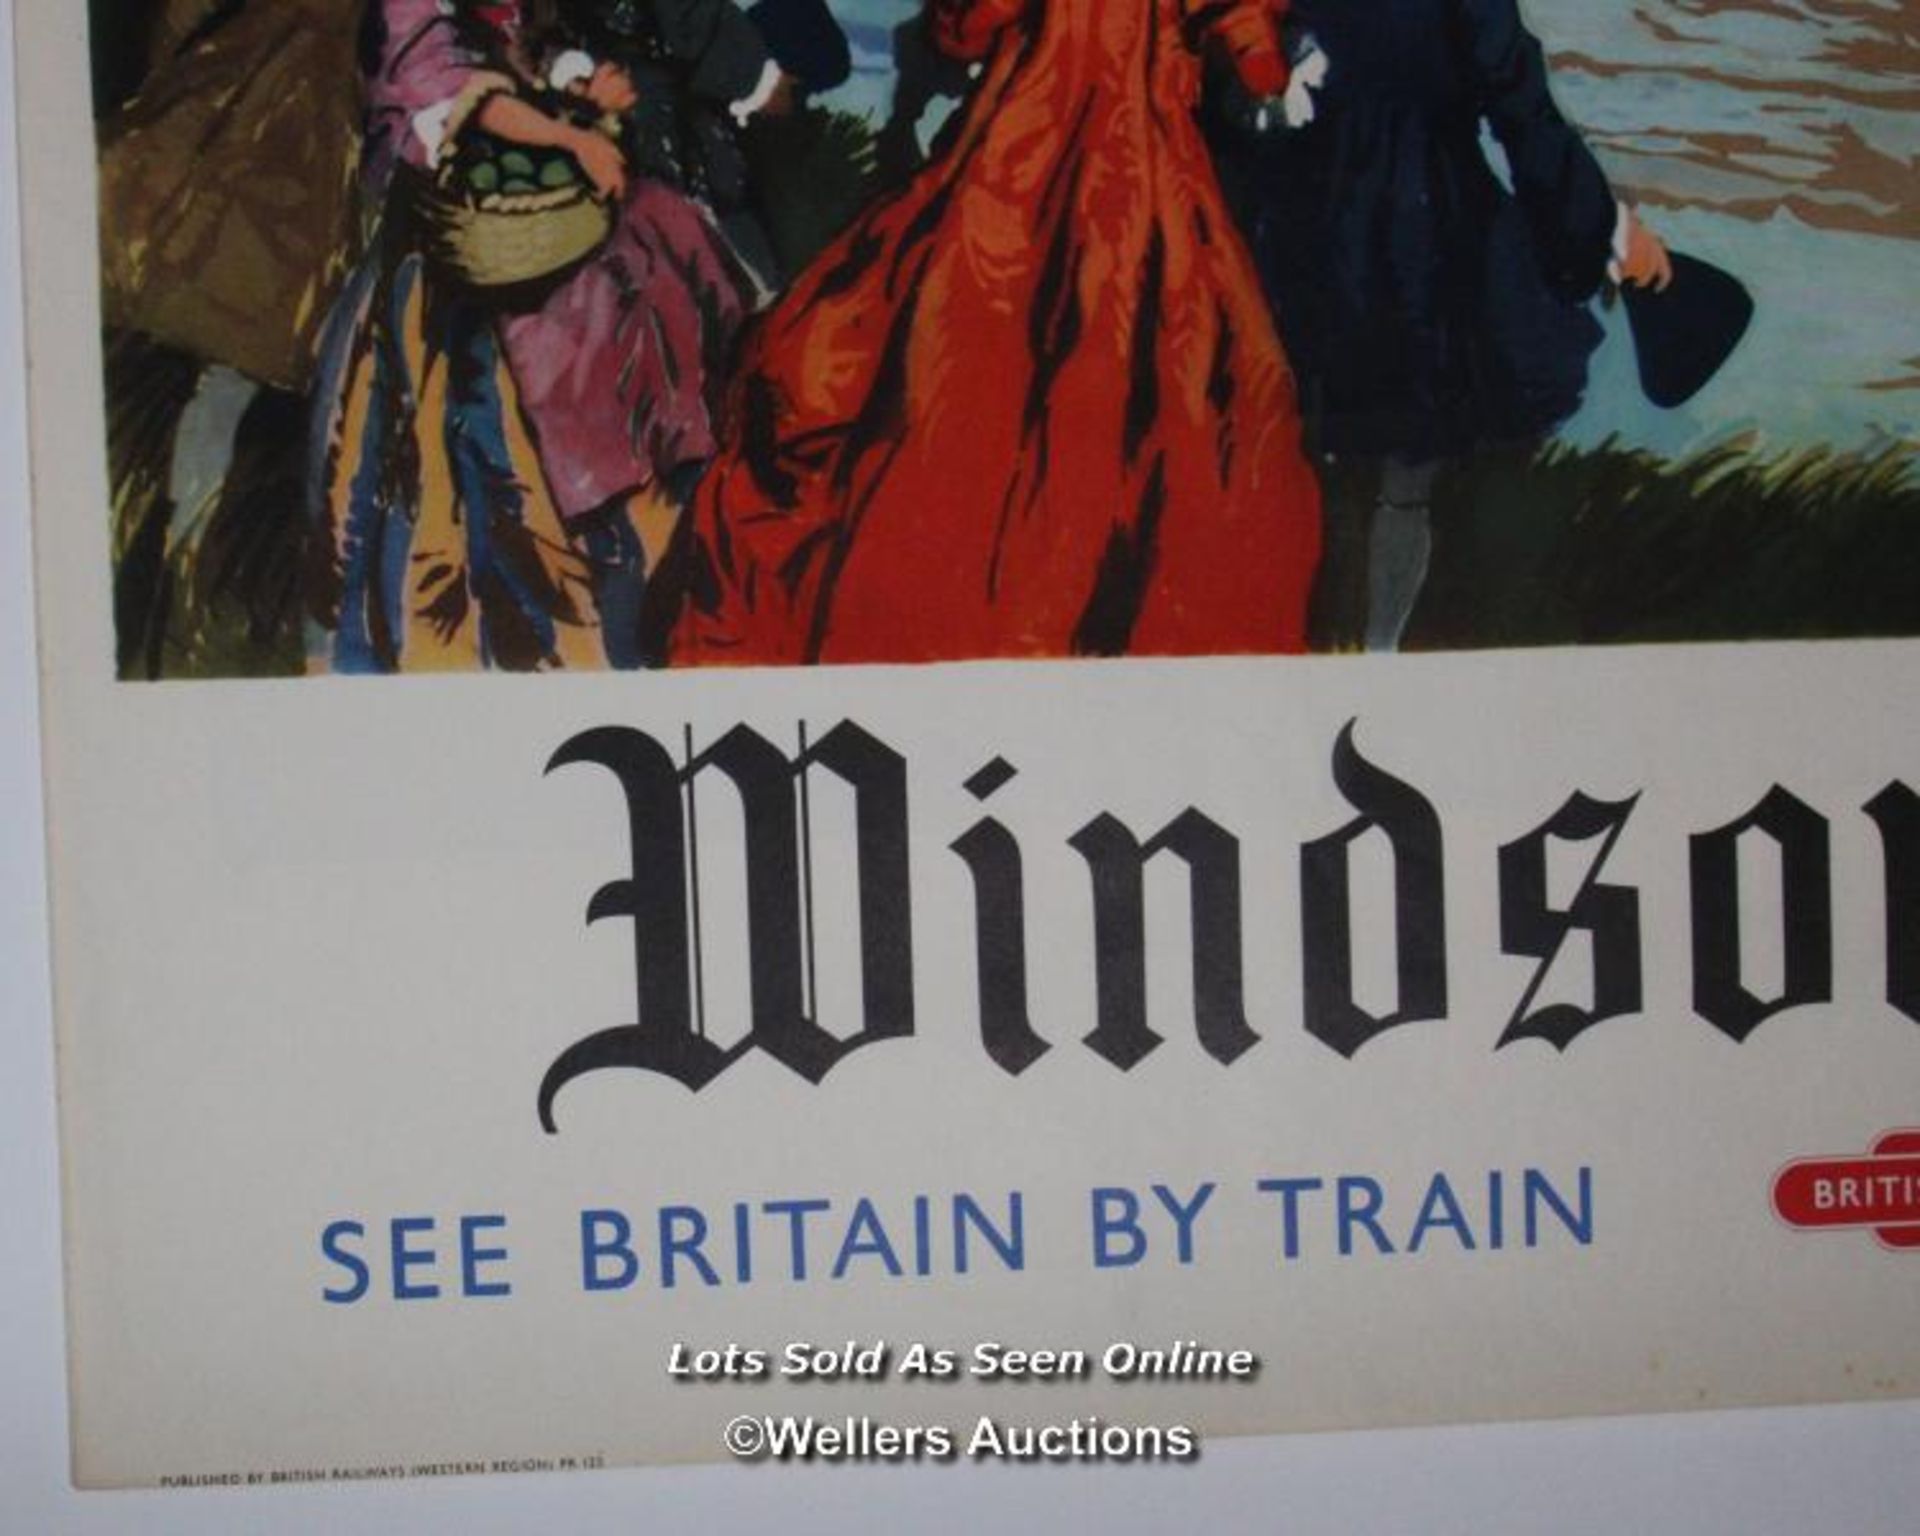 Vintage British Railways poster 'Windsor - See Britain By Train' by Gordon Nicoll double royal,25 - Image 5 of 6